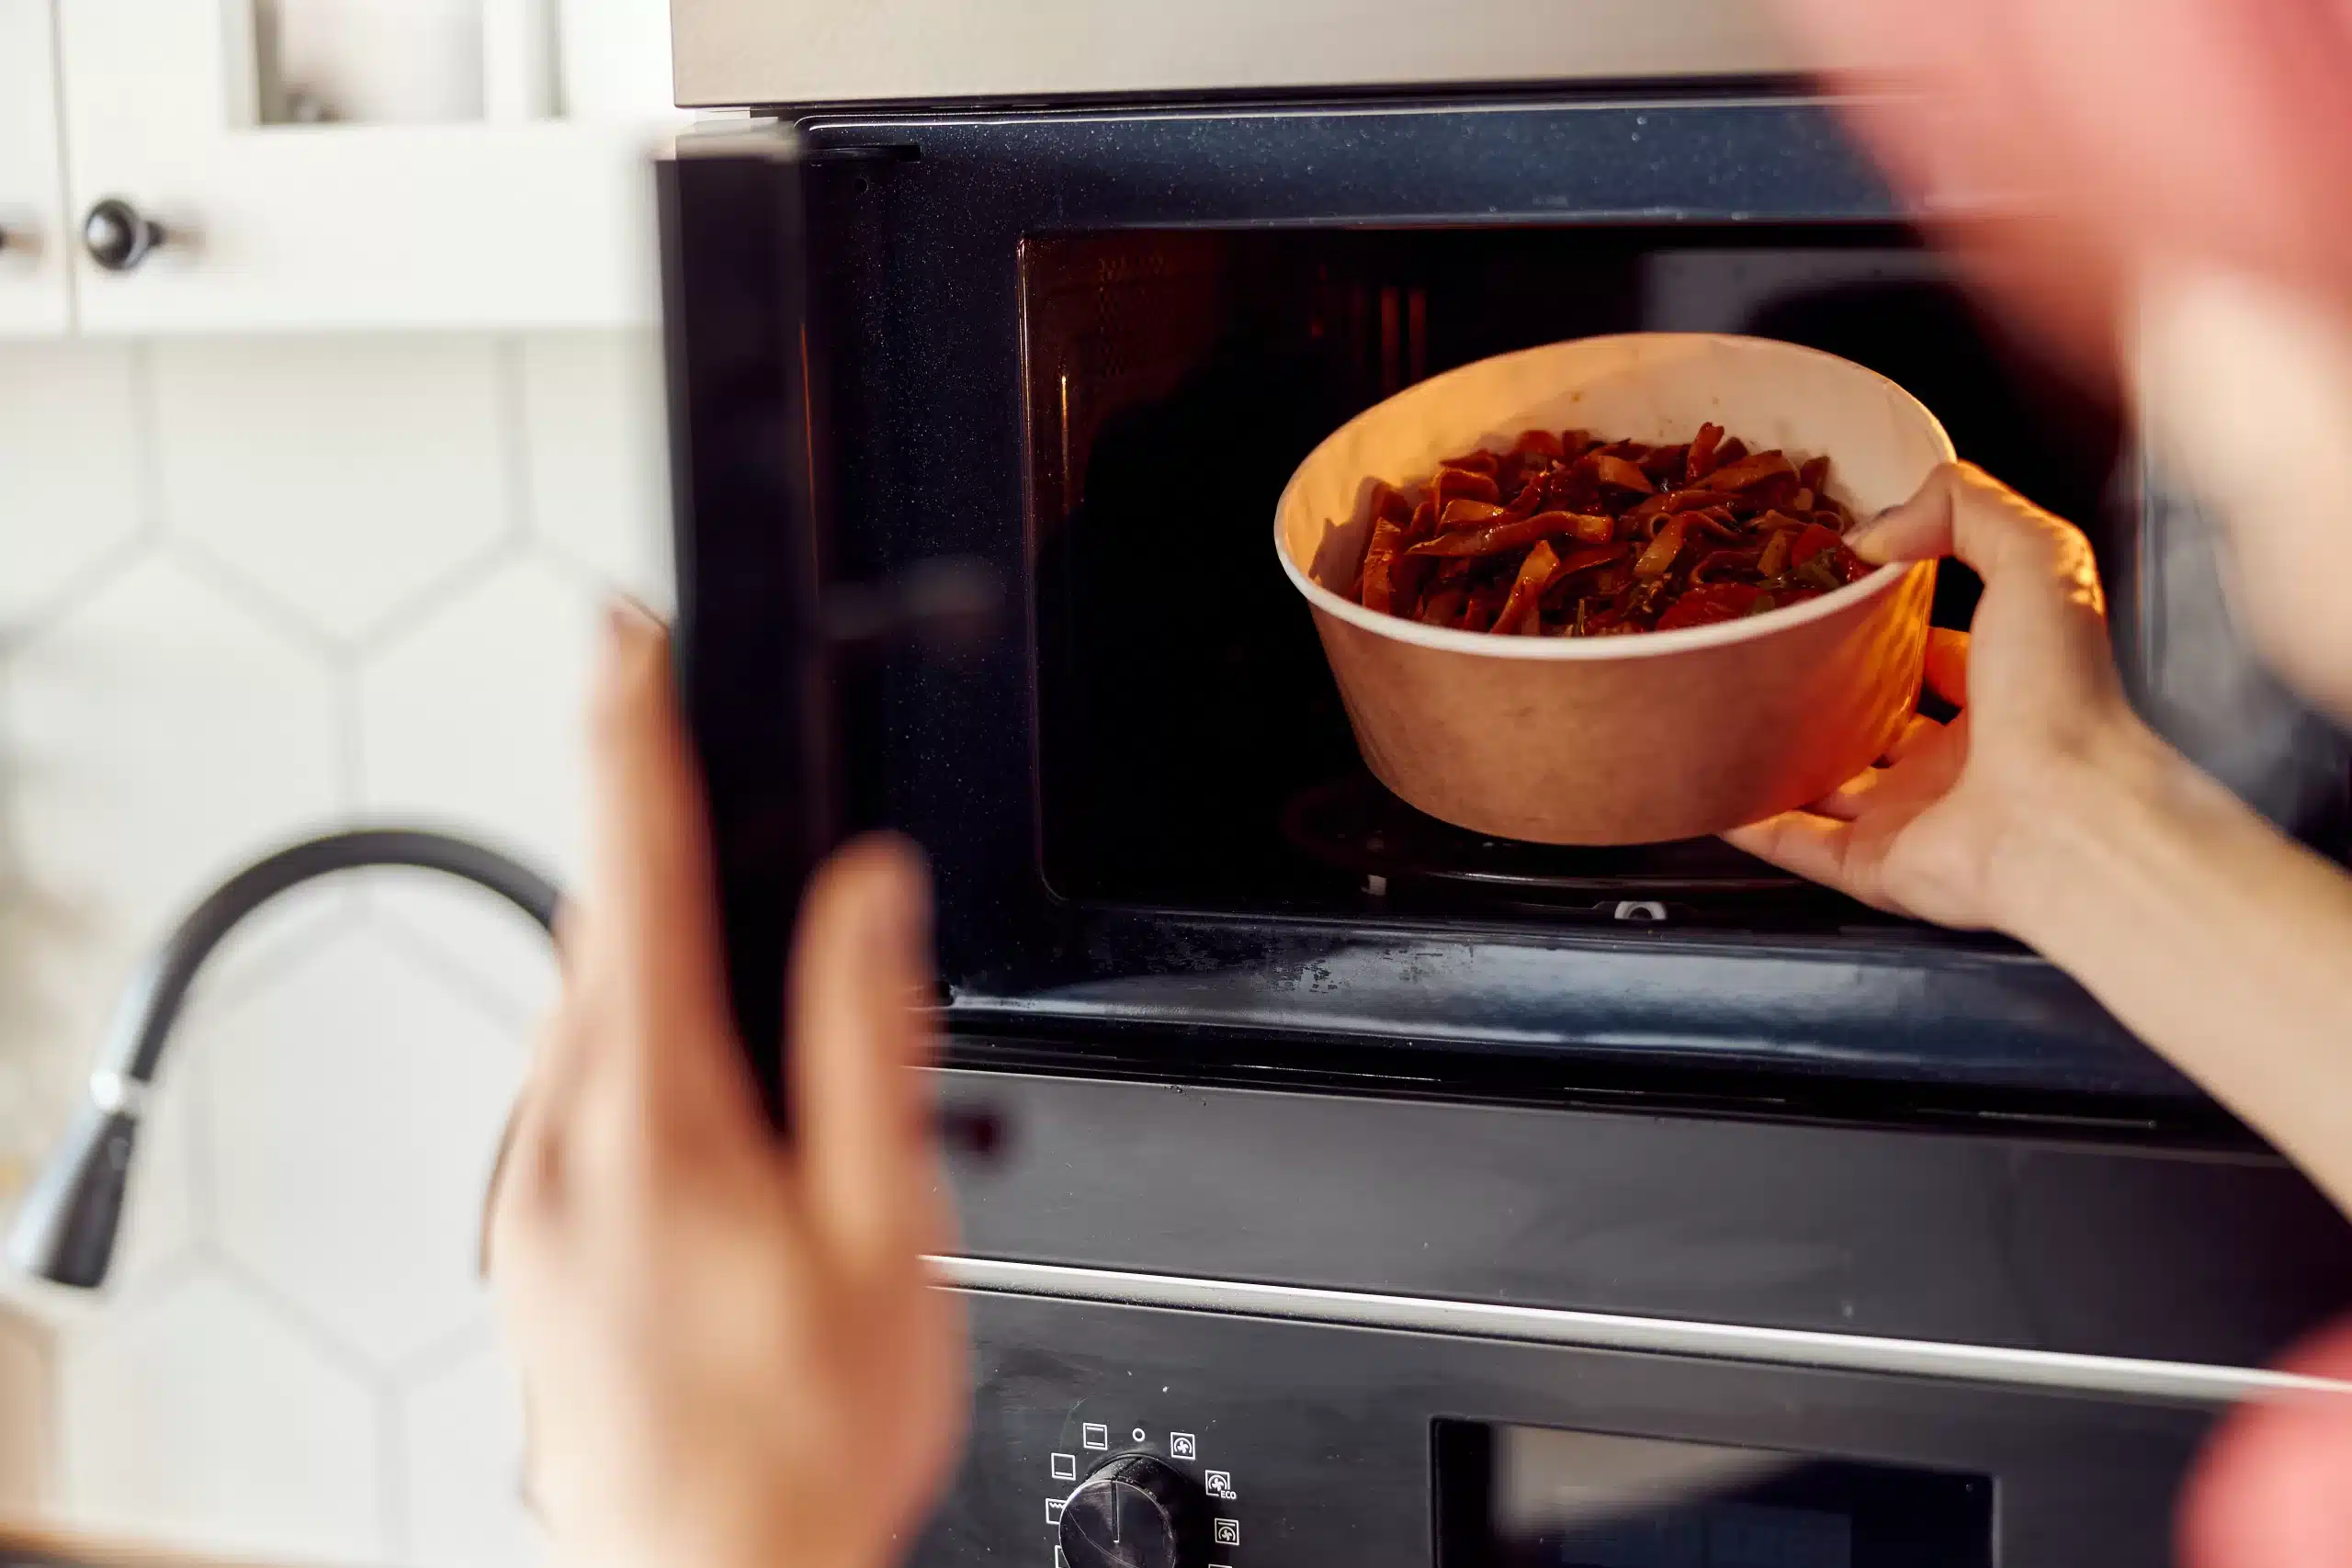 Reset Your Samsung Microwave